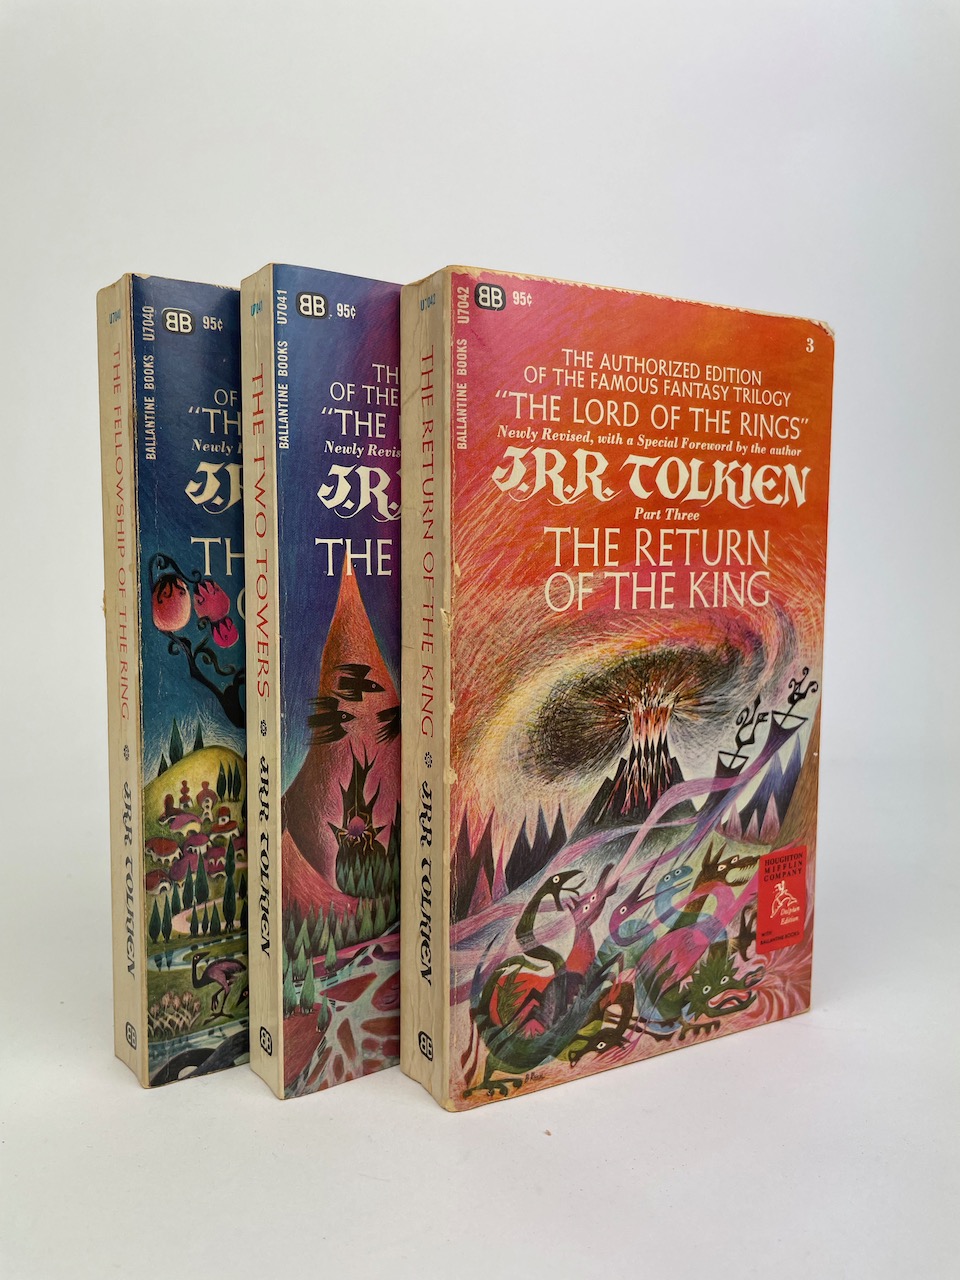 The Lord of the Rings from 1968, Authorized Edition in Black, White and Red Publishers Slipcase 8